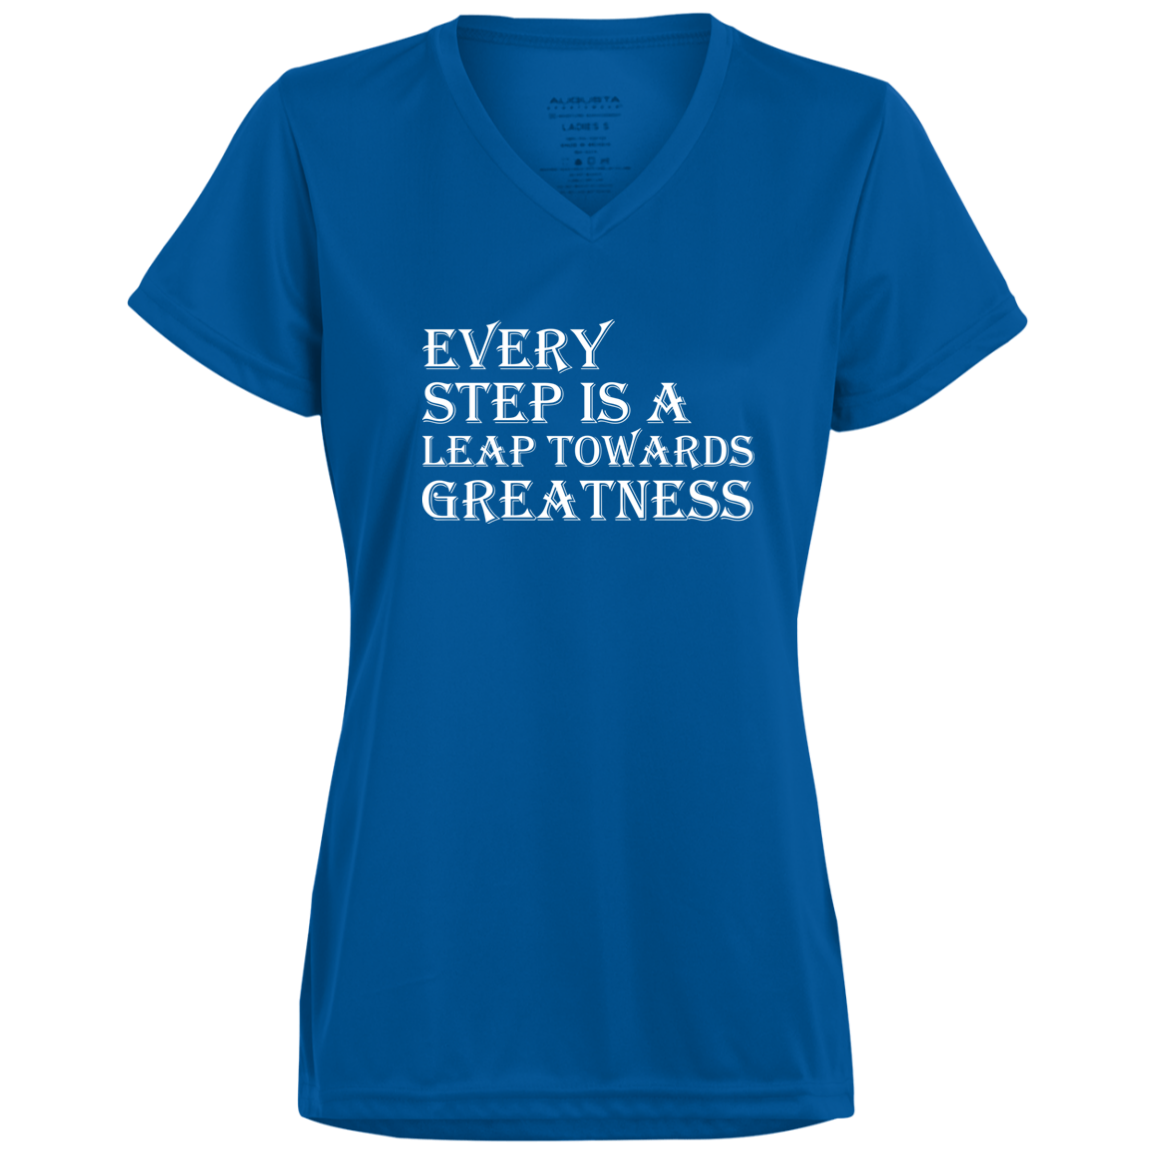 Women's Inspirational Top Every step is a leap towards greatness